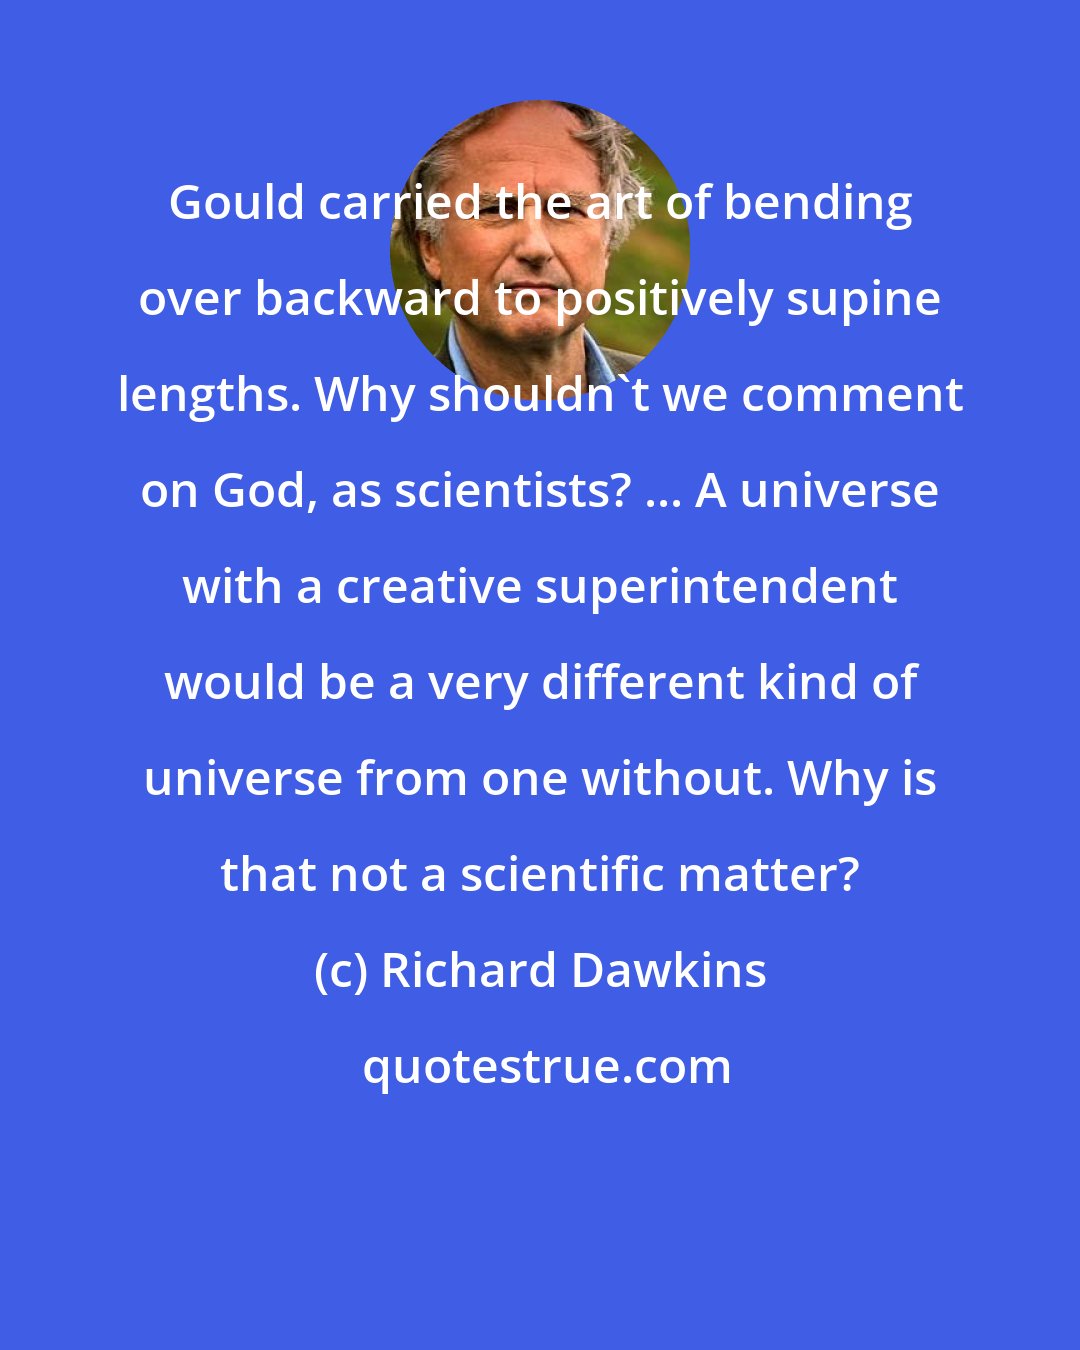 Richard Dawkins: Gould carried the art of bending over backward to positively supine lengths. Why shouldn't we comment on God, as scientists? ... A universe with a creative superintendent would be a very different kind of universe from one without. Why is that not a scientific matter?